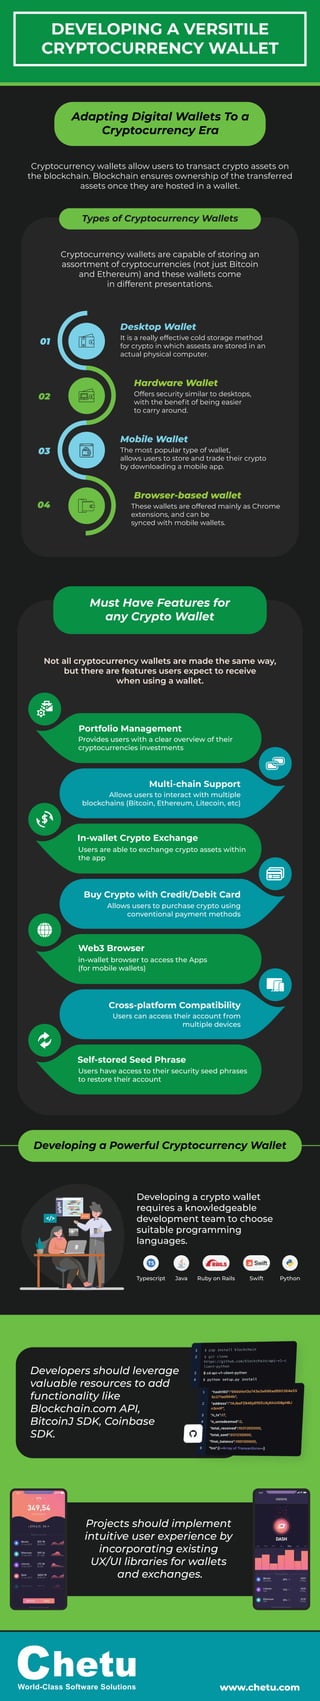 Cryptocurrency wallets allow users to transact crypto assets on
the blockchain. Blockchain ensures ownership of the transferred
assets once they are hosted in a wallet.
DEVELOPING A VERSITILE
CRYPTOCURRENCY WALLET
Cryptocurrency wallets are capable of storing an
assortment of cryptocurrencies (not just Bitcoin
and Ethereum) and these wallets come
in different presentations.
Desktop Wallet
It is a really effective cold storage method
for crypto in which assests are stored in an
actual physical computer.
01
Hardware Wallet
Offers security similar to desktops,
with the beneﬁt of being easier
to carry around.
02
Mobile Wallet
The most popular type of wallet,
allows users to store and trade their crypto
by downloading a mobile app.
03
Browser-based wallet
These wallets are offered mainly as Chrome
extensions, and can be
synced with mobile wallets.
04
Types of Cryptocurrency Wallets
Portfolio Management
Provides users with a clear overview of their
cryptocurrencies investments
Multi-chain Support
Allows users to interact with multiple
blockchains (Bitcoin, Ethereum, Litecoin, etc)
In-wallet Crypto Exchange
Users are able to exchange crypto assets within
the app
Buy Crypto with Credit/Debit Card
Allows users to purchase crypto using
conventional payment methods
Web3 Browser
in-wallet browser to access the Apps
(for mobile wallets)
Cross-platform Compatibility
Users can access their account from
multiple devices
Self-stored Seed Phrase
Users have access to their security seed phrases
to restore their account
Developing a Powerful Cryptocurrency Wallet
Not all cryptocurrency wallets are made the same way,
but there are features users expect to receive
when using a wallet.
Must Have Features for
any Crypto Wallet
Typescript Java Ruby on Rails Swift Python
Developing a crypto wallet
requires a knowledgeable
development team to choose
suitable programming
languages.
</>
www.chetu.com
Adapting Digital Wallets To a
Cryptocurrency Era
Projects should implement
intuitive user experience by
incorporating existing
UX/UI libraries for wallets
and exchanges.
Developers should leverage
valuable resources to add
functionality like
Blockchain.com API,
BitcoinJ SDK, Coinbase
SDK.
 